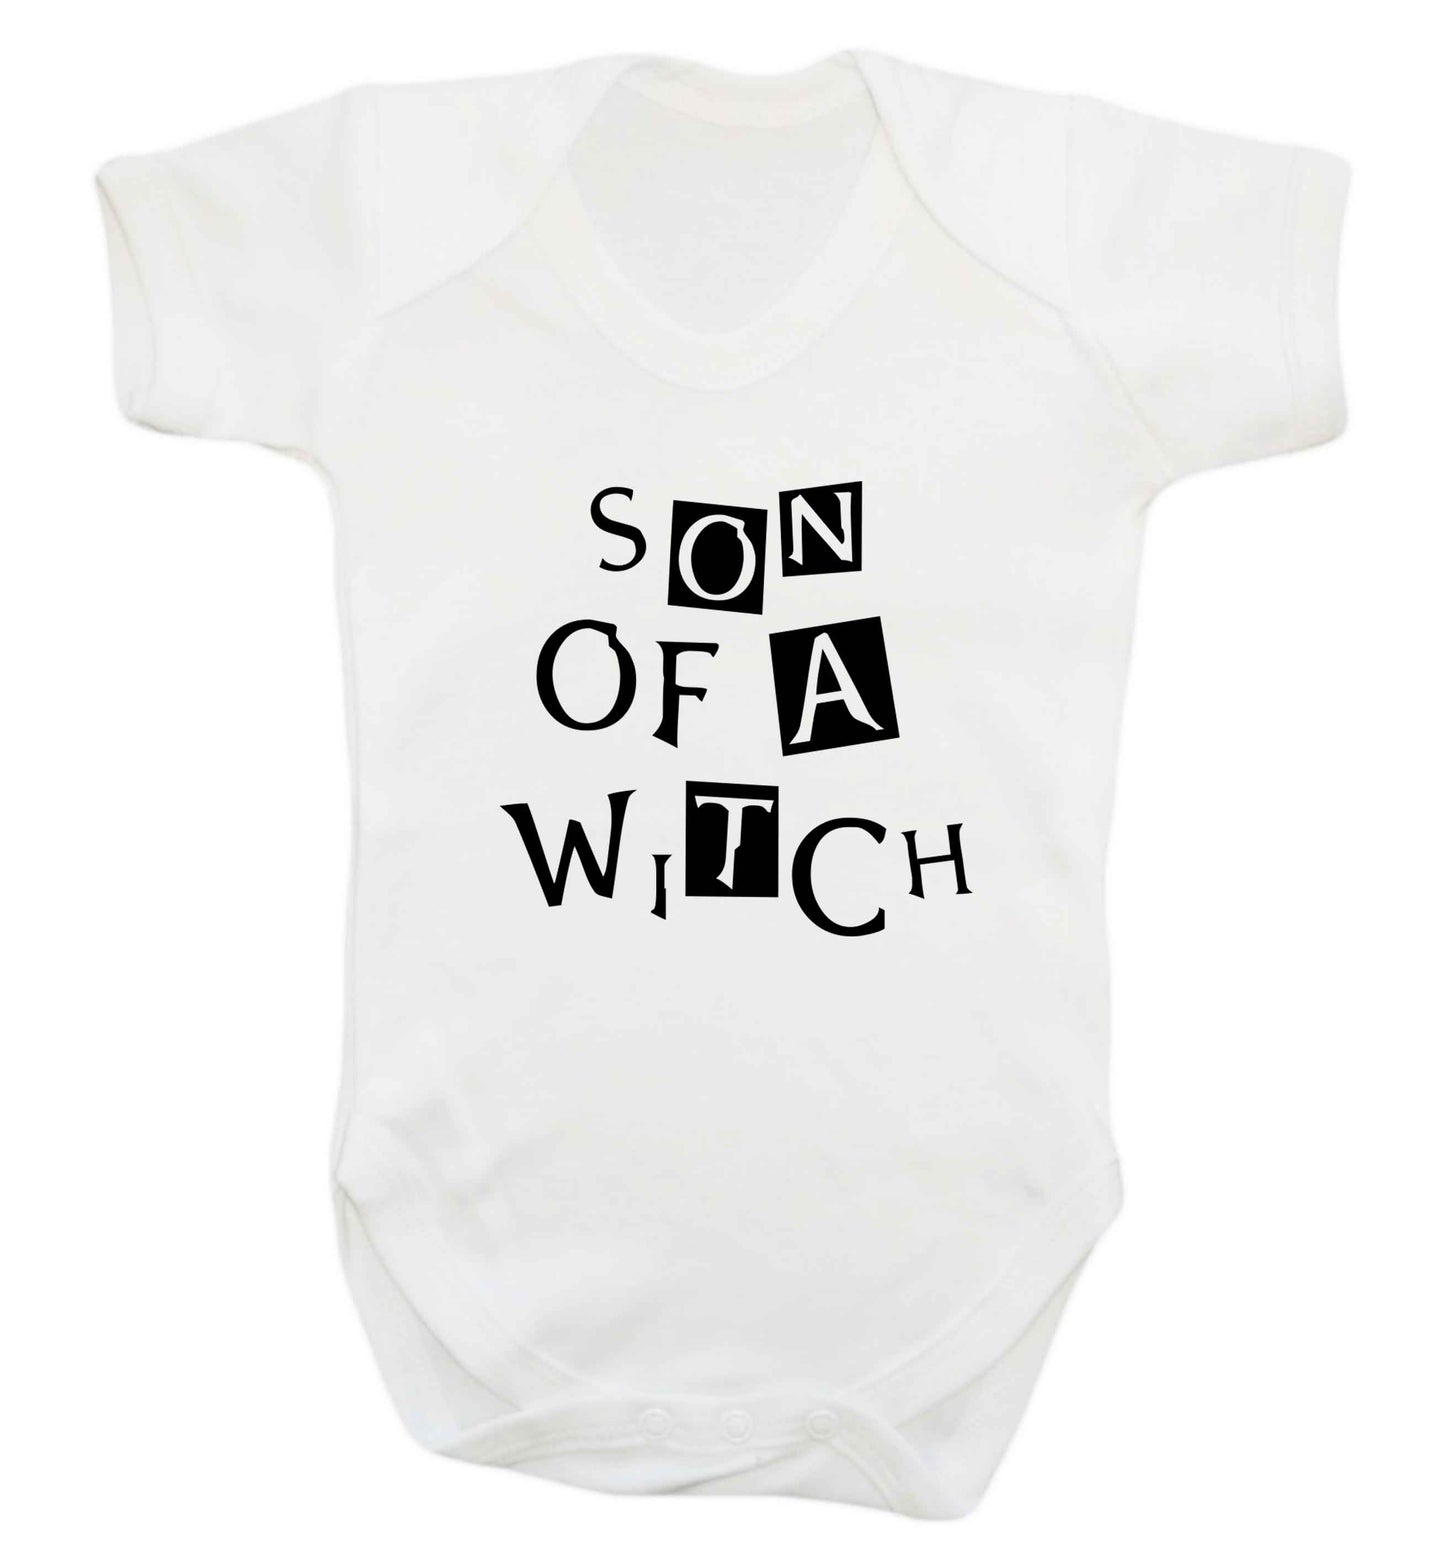 Son of a witch baby vest white 18-24 months